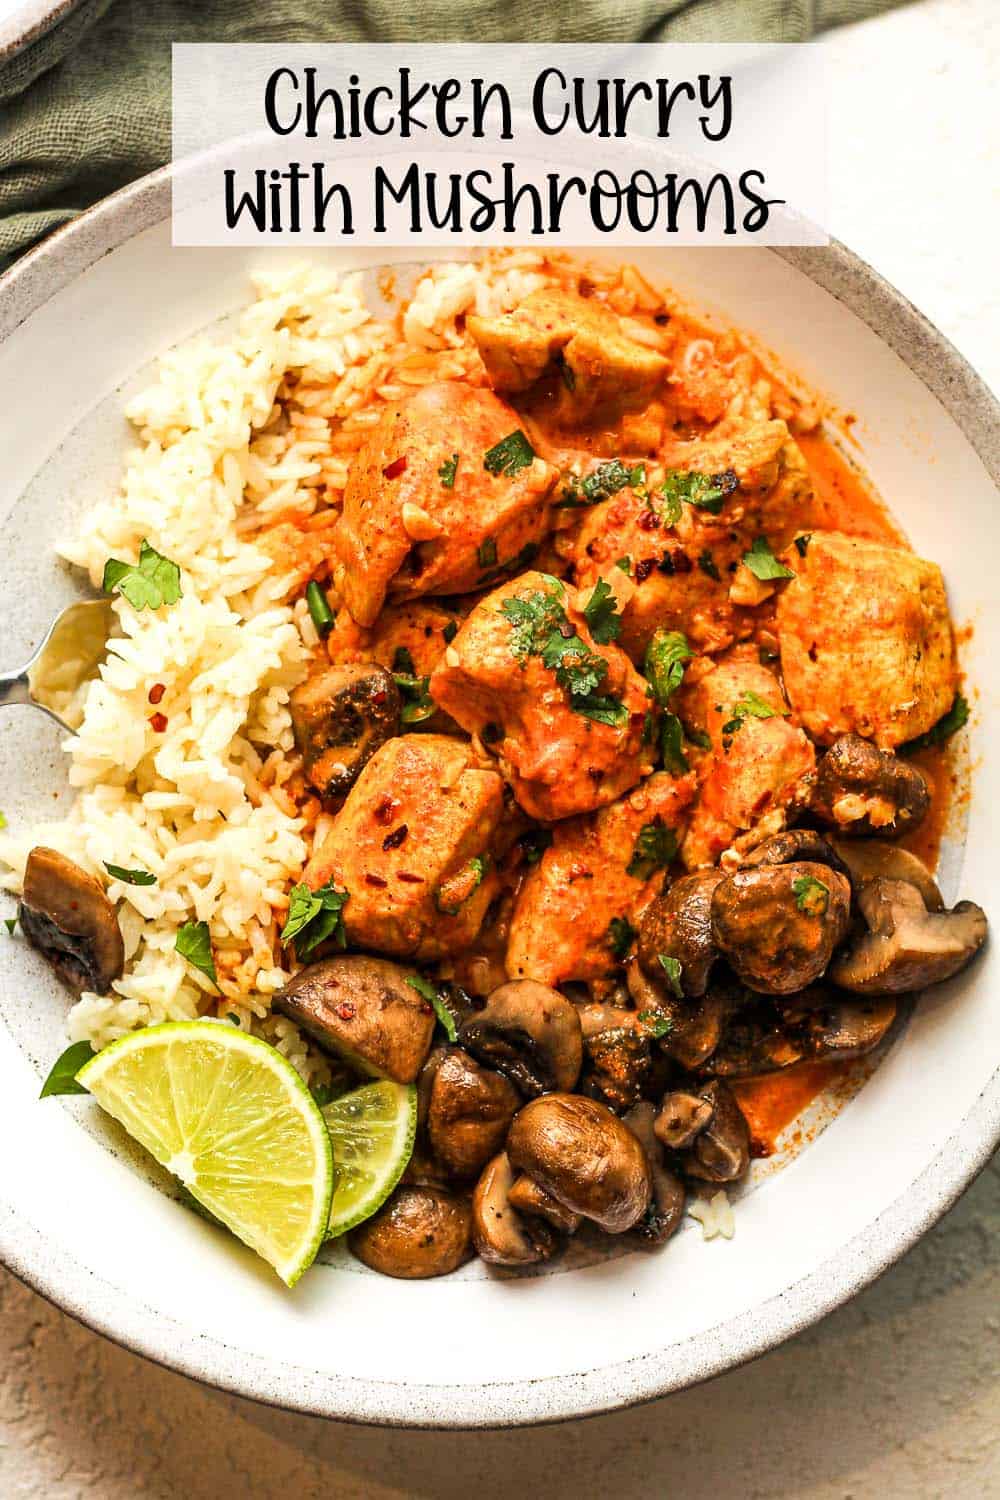 A bowl of chicken curry with mushrooms over rice.